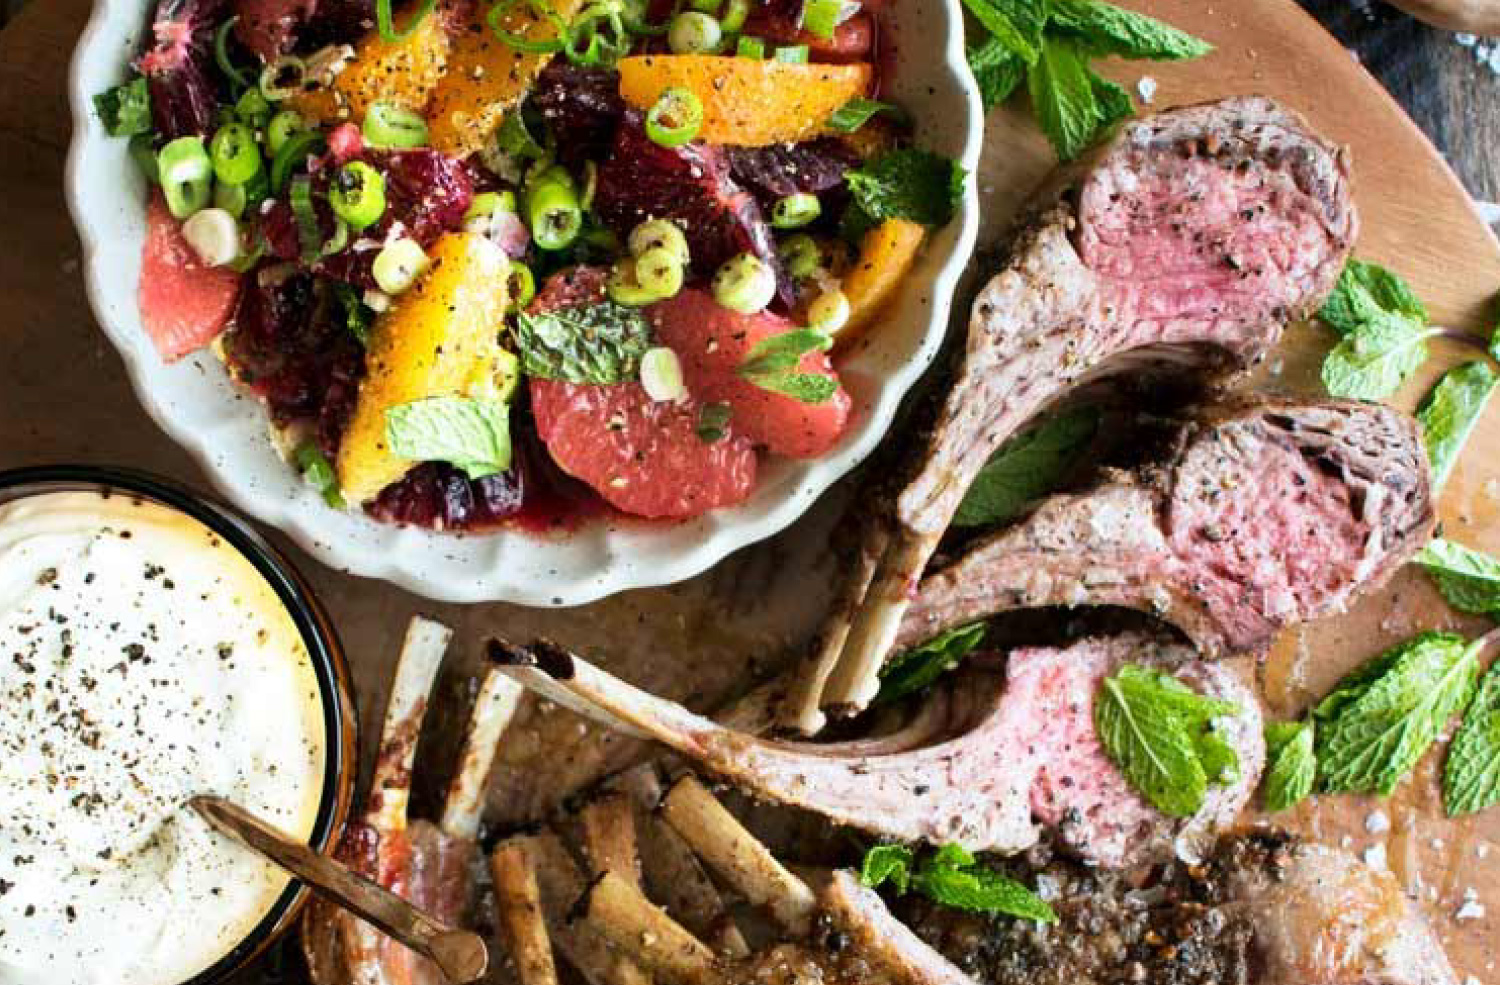 Spiced Rack of Lamb with Citrus Salad